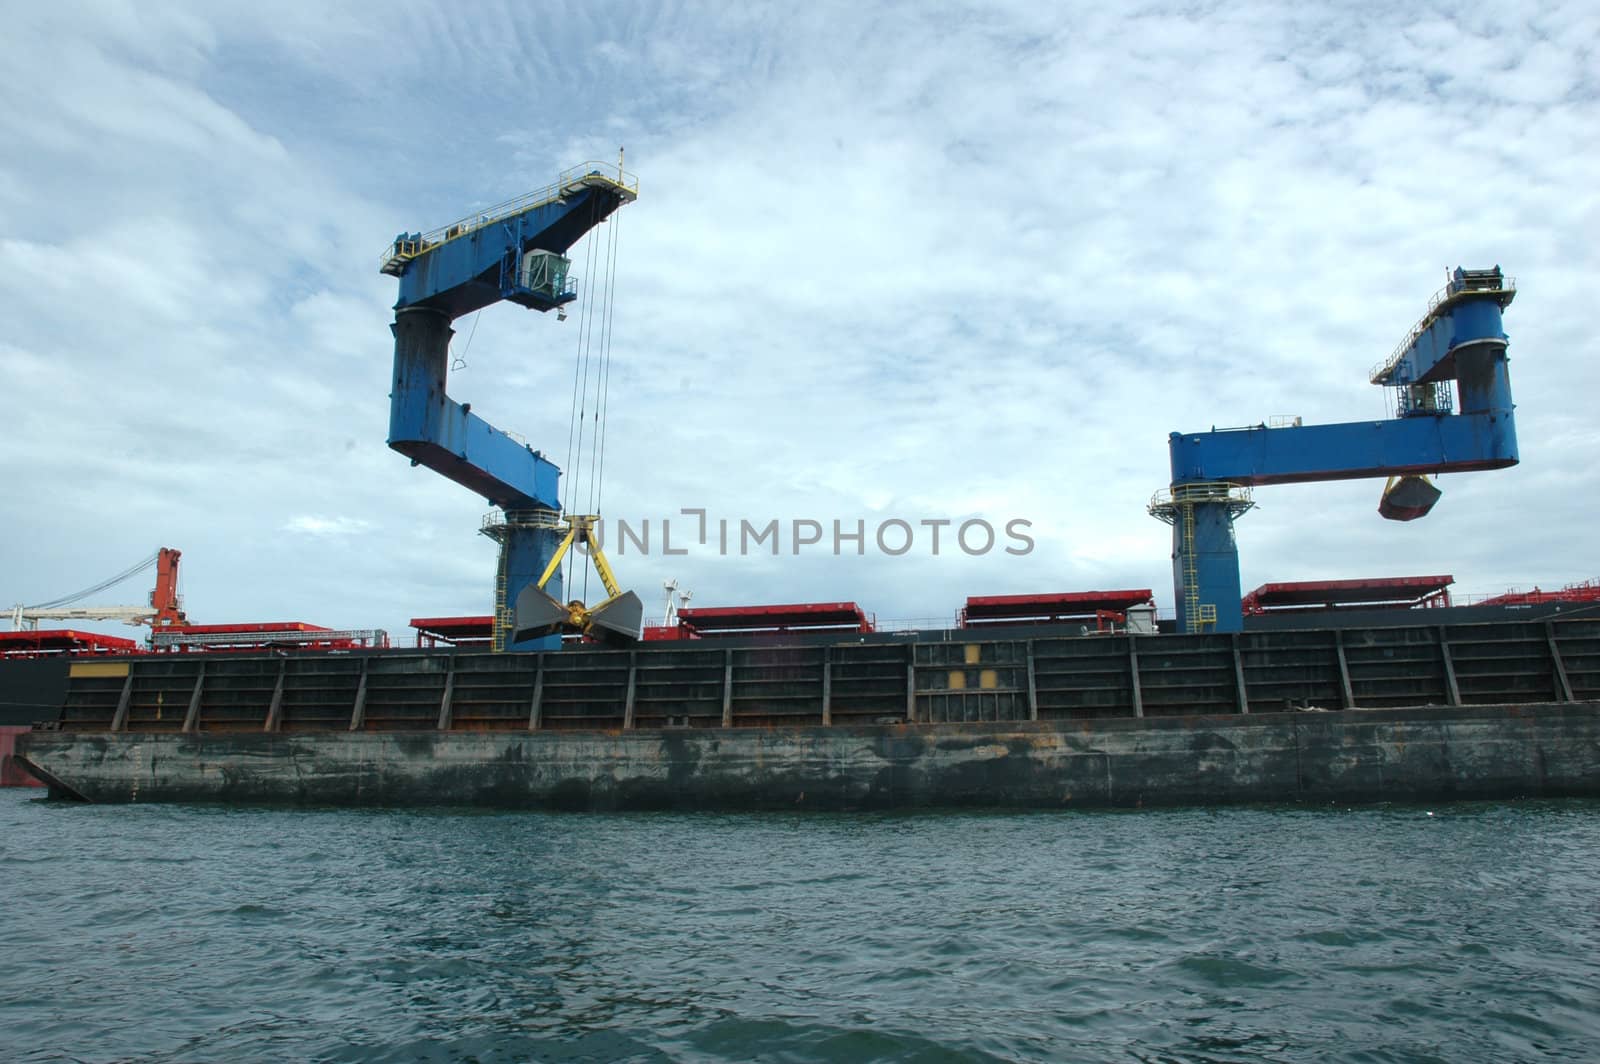 coal is being loaded onto tankers with a blue crane from a pontoon by antonihalim